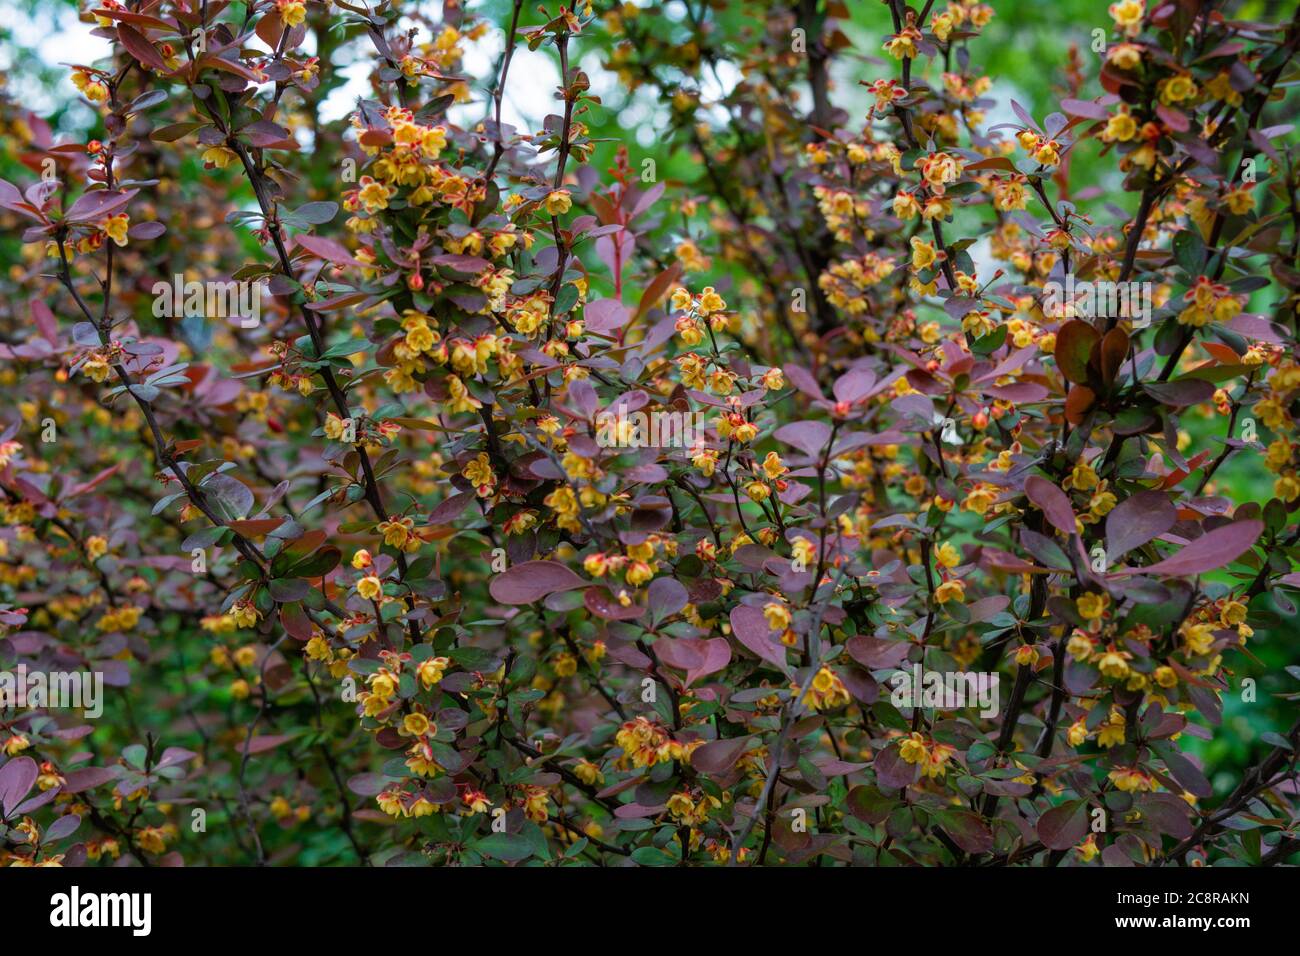 Beautiful blooming yellow flowers by bush with red purple leaves. Berberis ottawensis Auricoma shrub Stock Photo